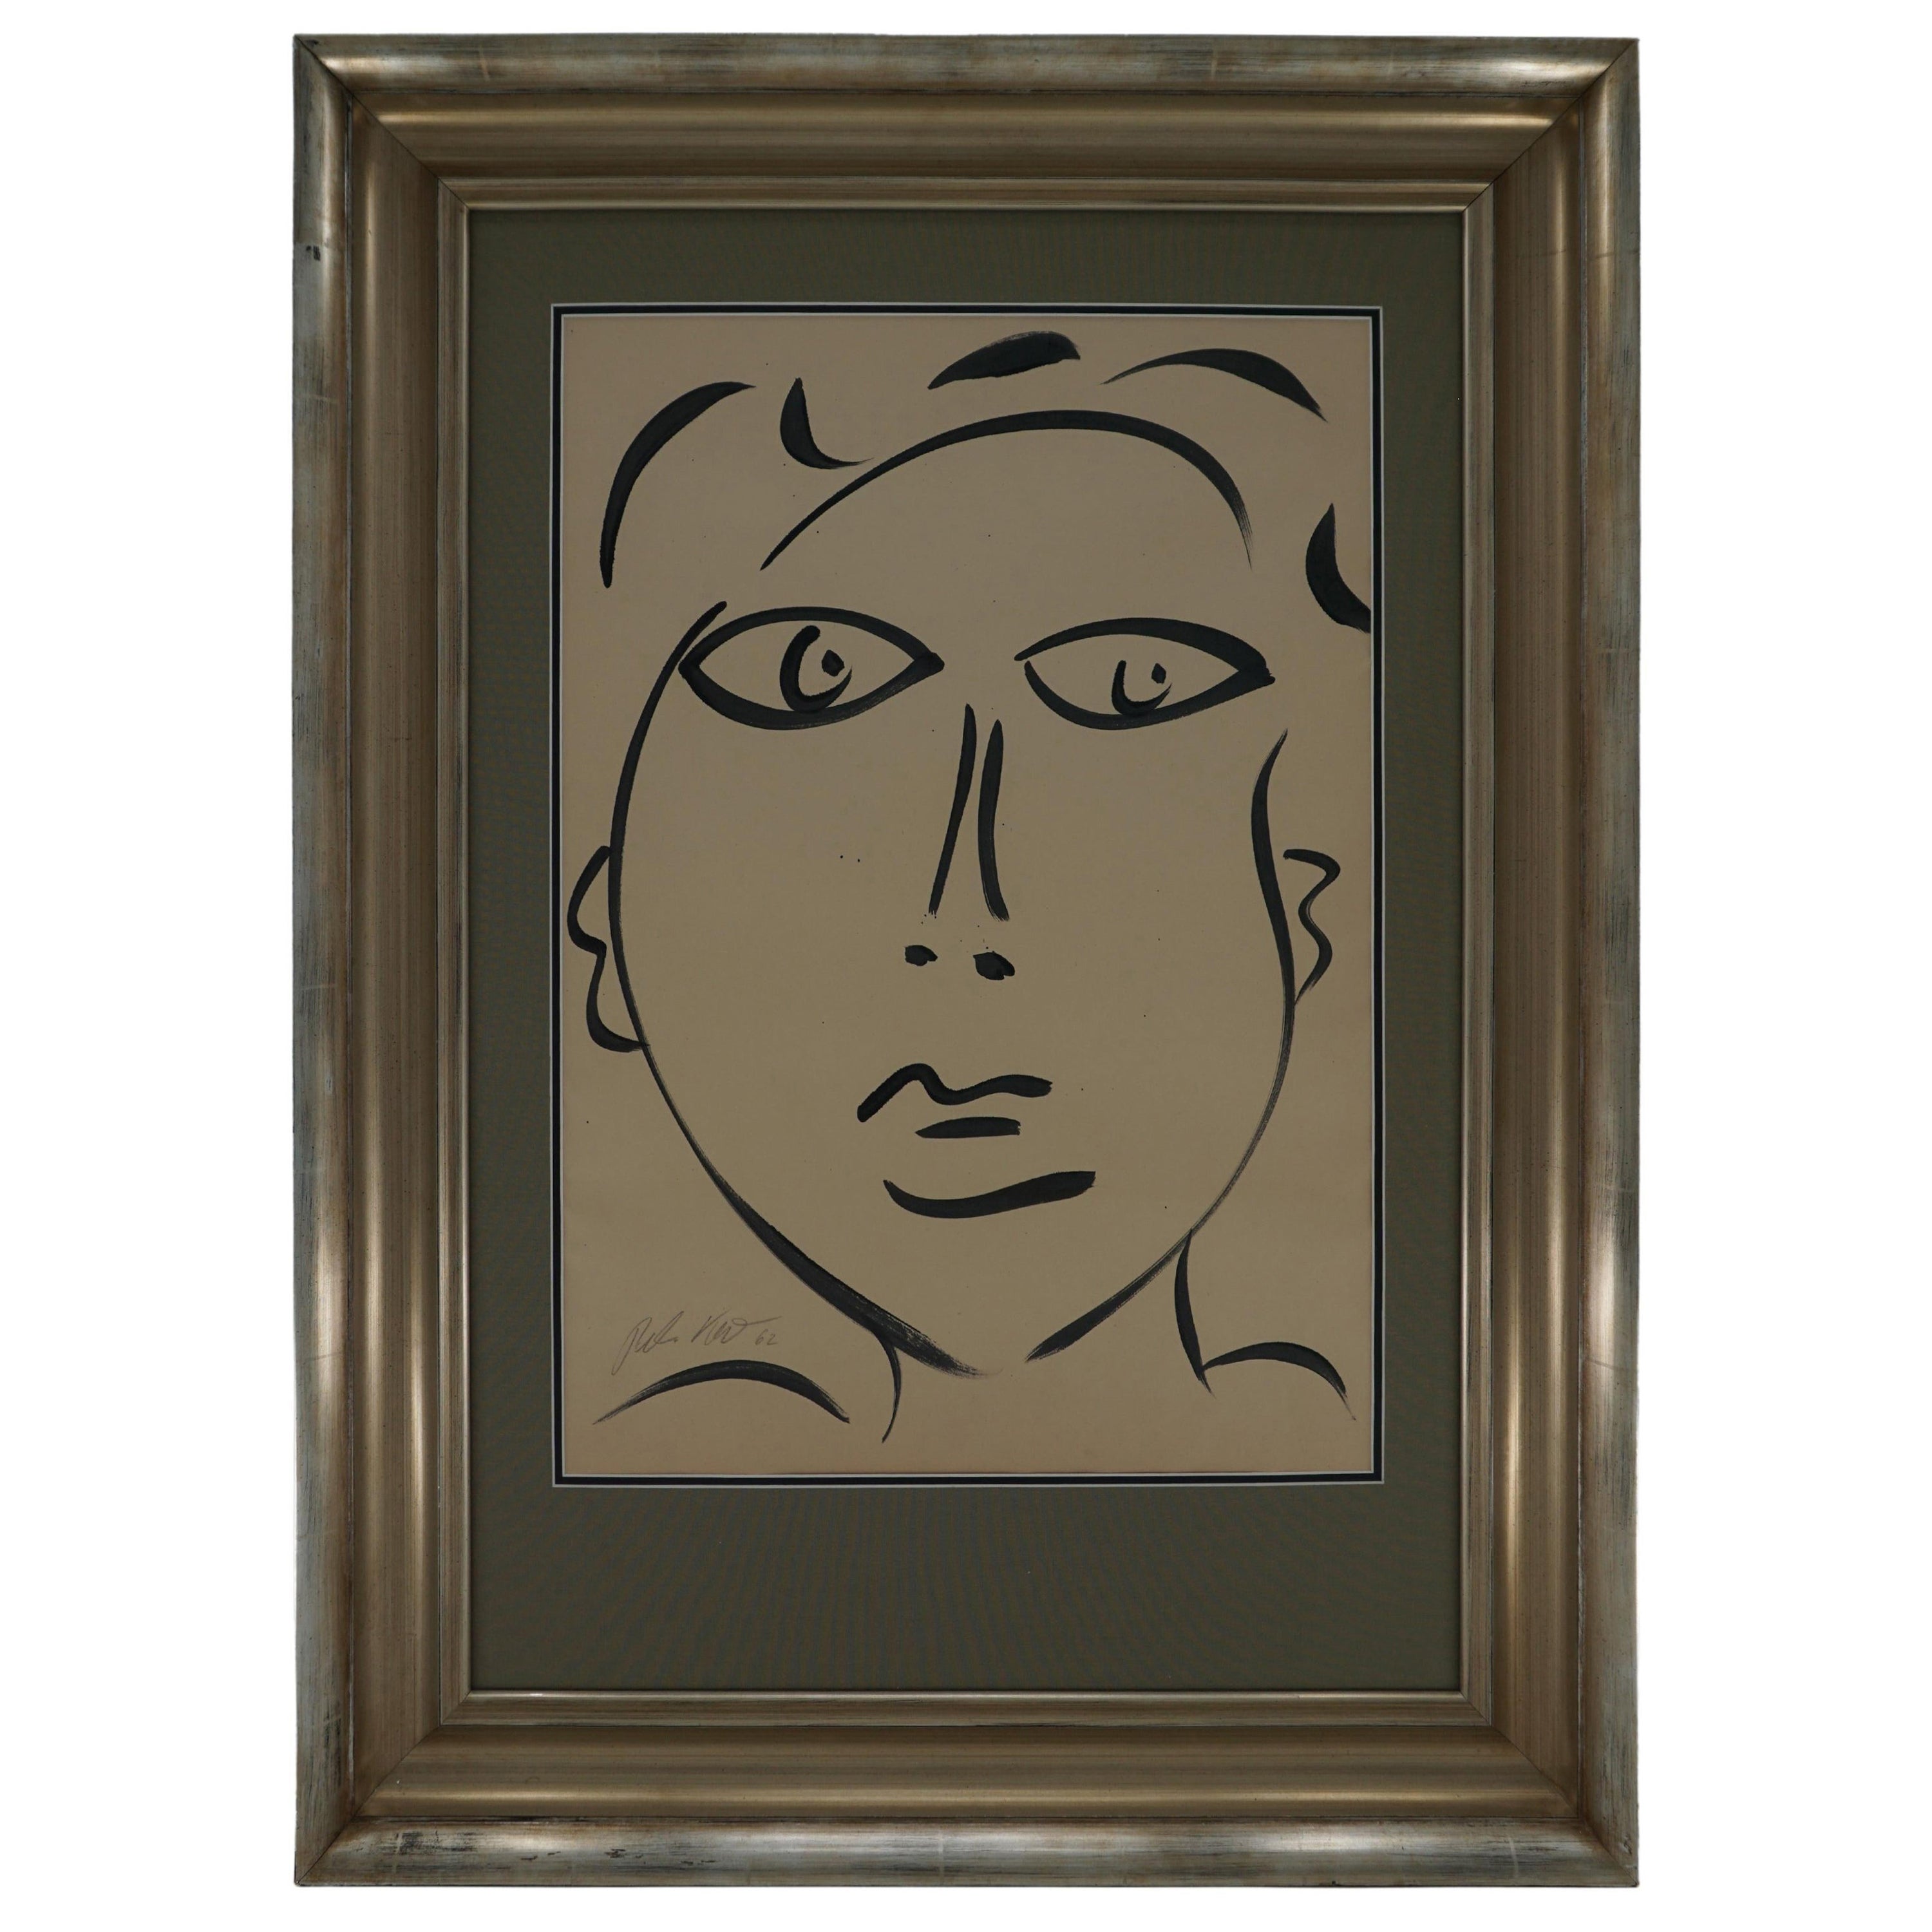 Painting by Peter Keil, New Wood Silver Frame with Linen Mat, Modern Art, C 1962